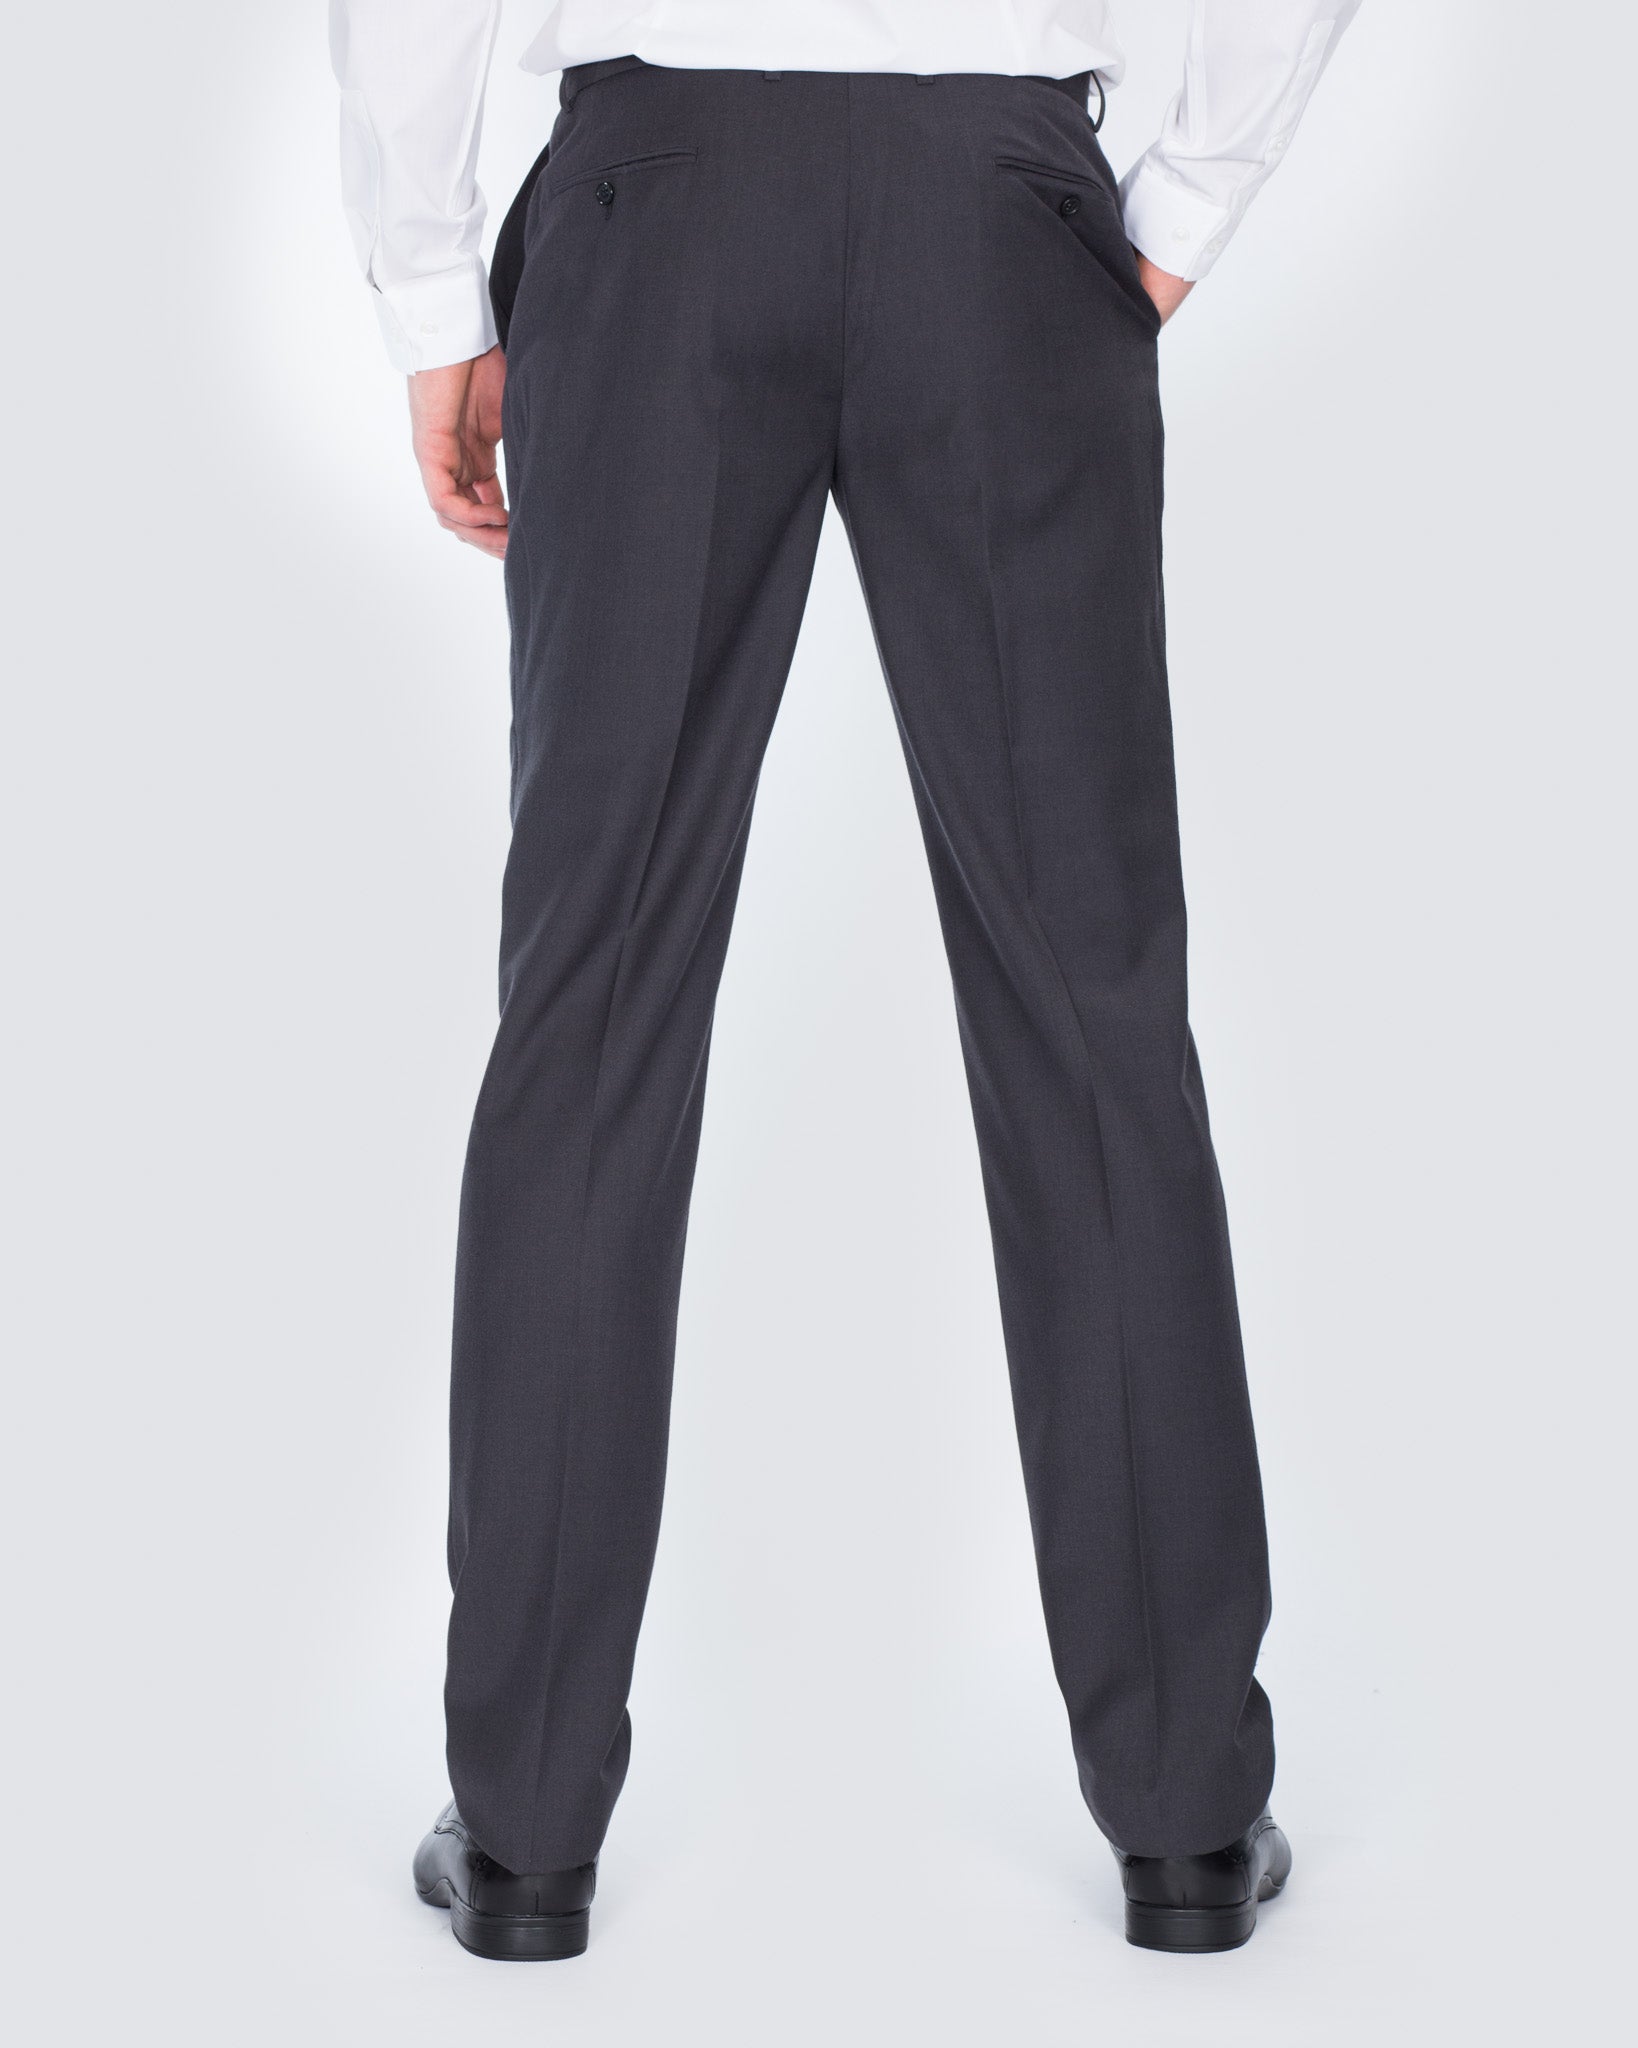 Skopes Slim Fit Superfine Twill Trousers (charcoal)